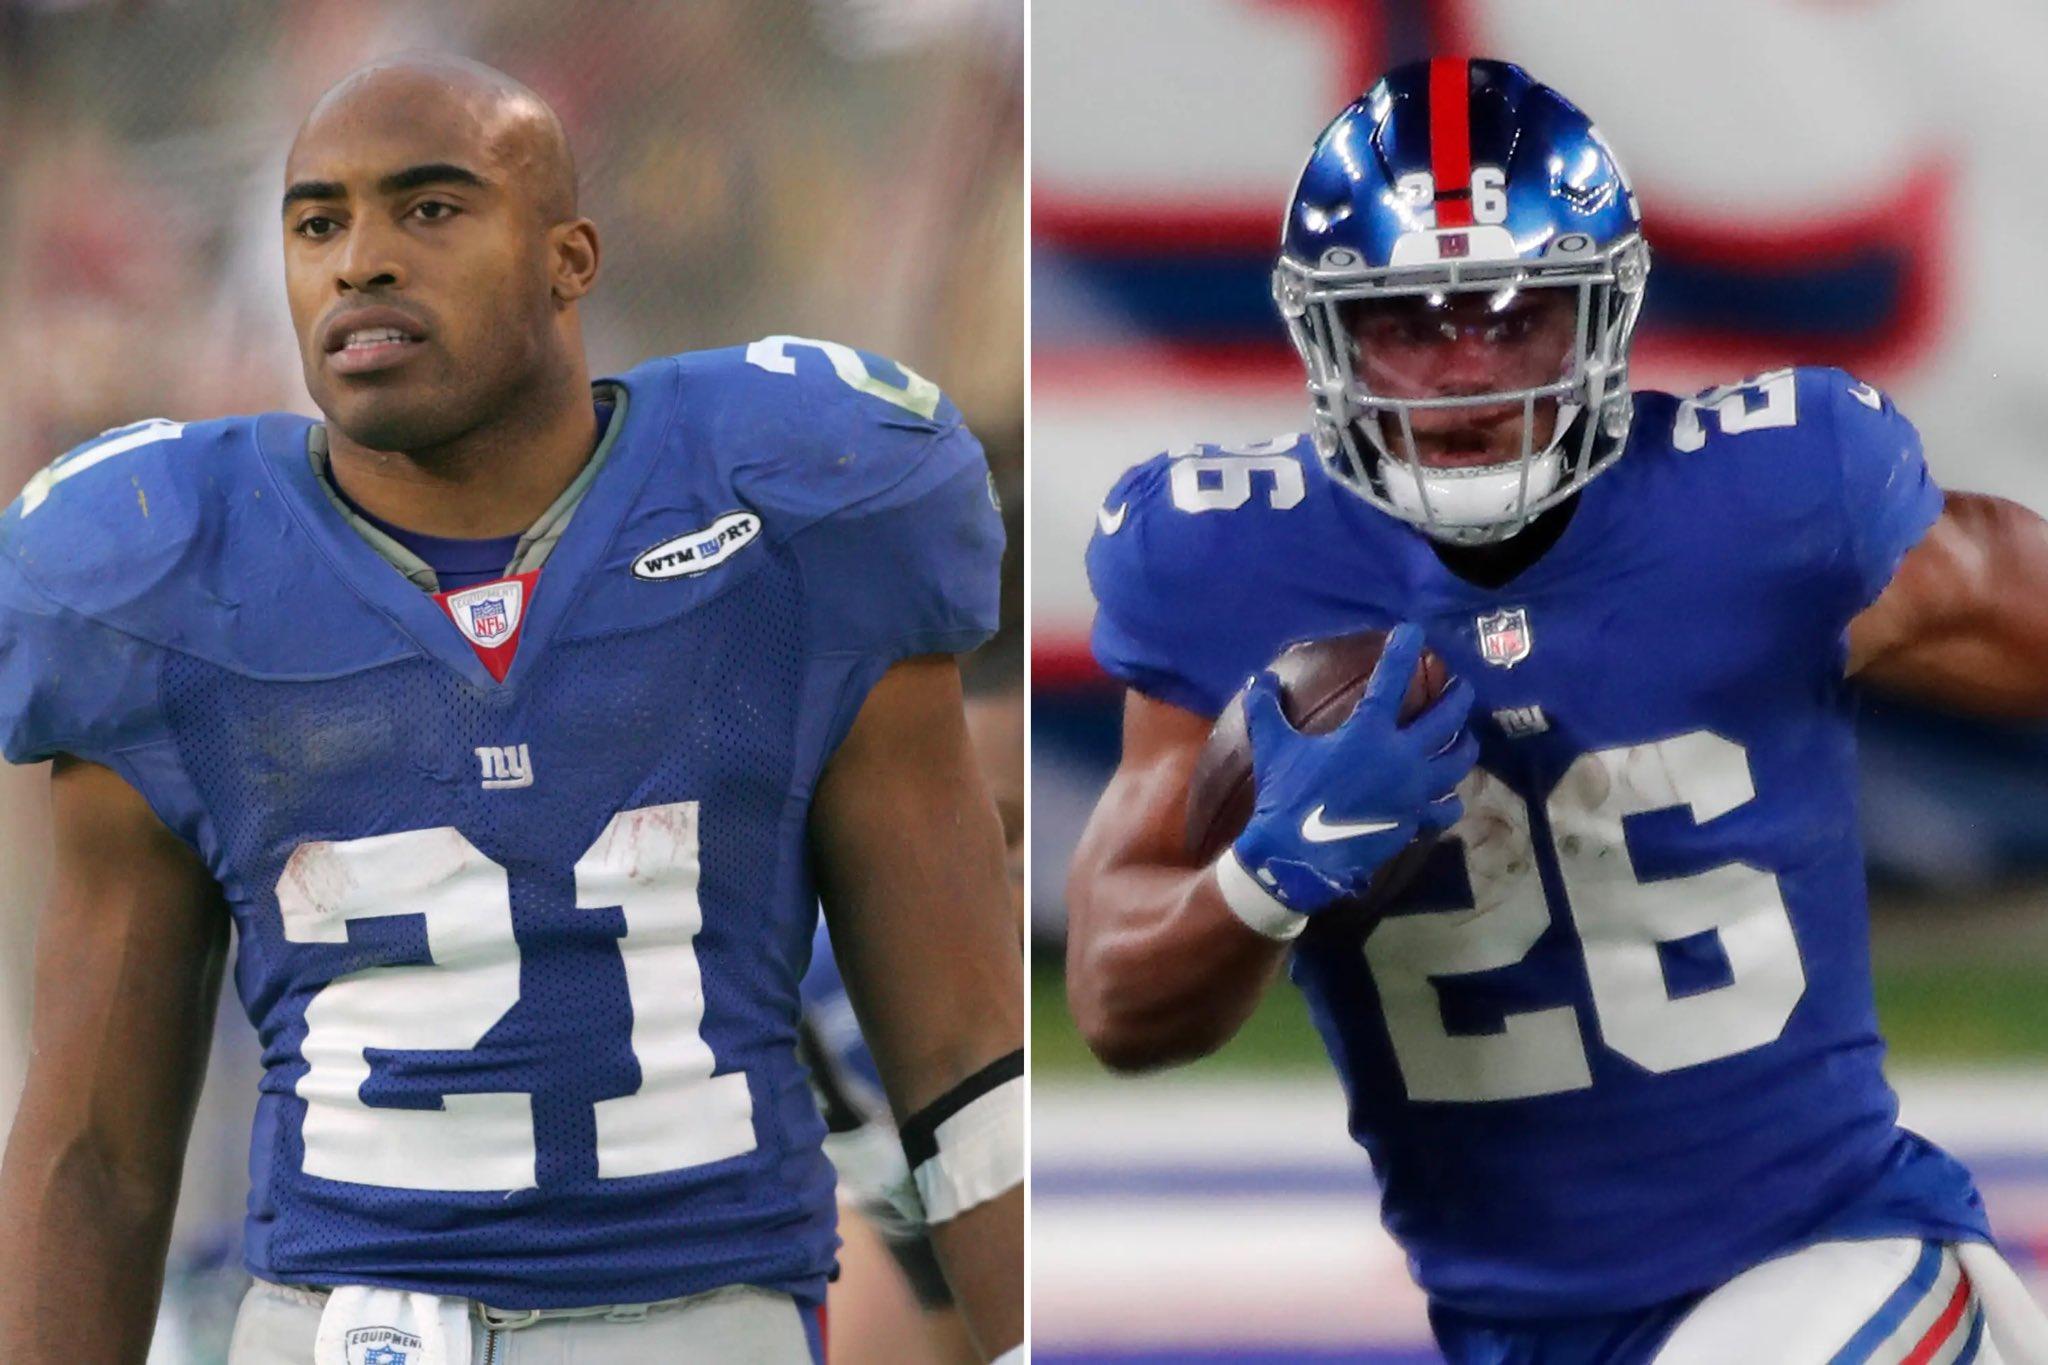 Giants legend Tiki Barber says Saquon Barkley is 'Dead to Me' after signing with the Eagles